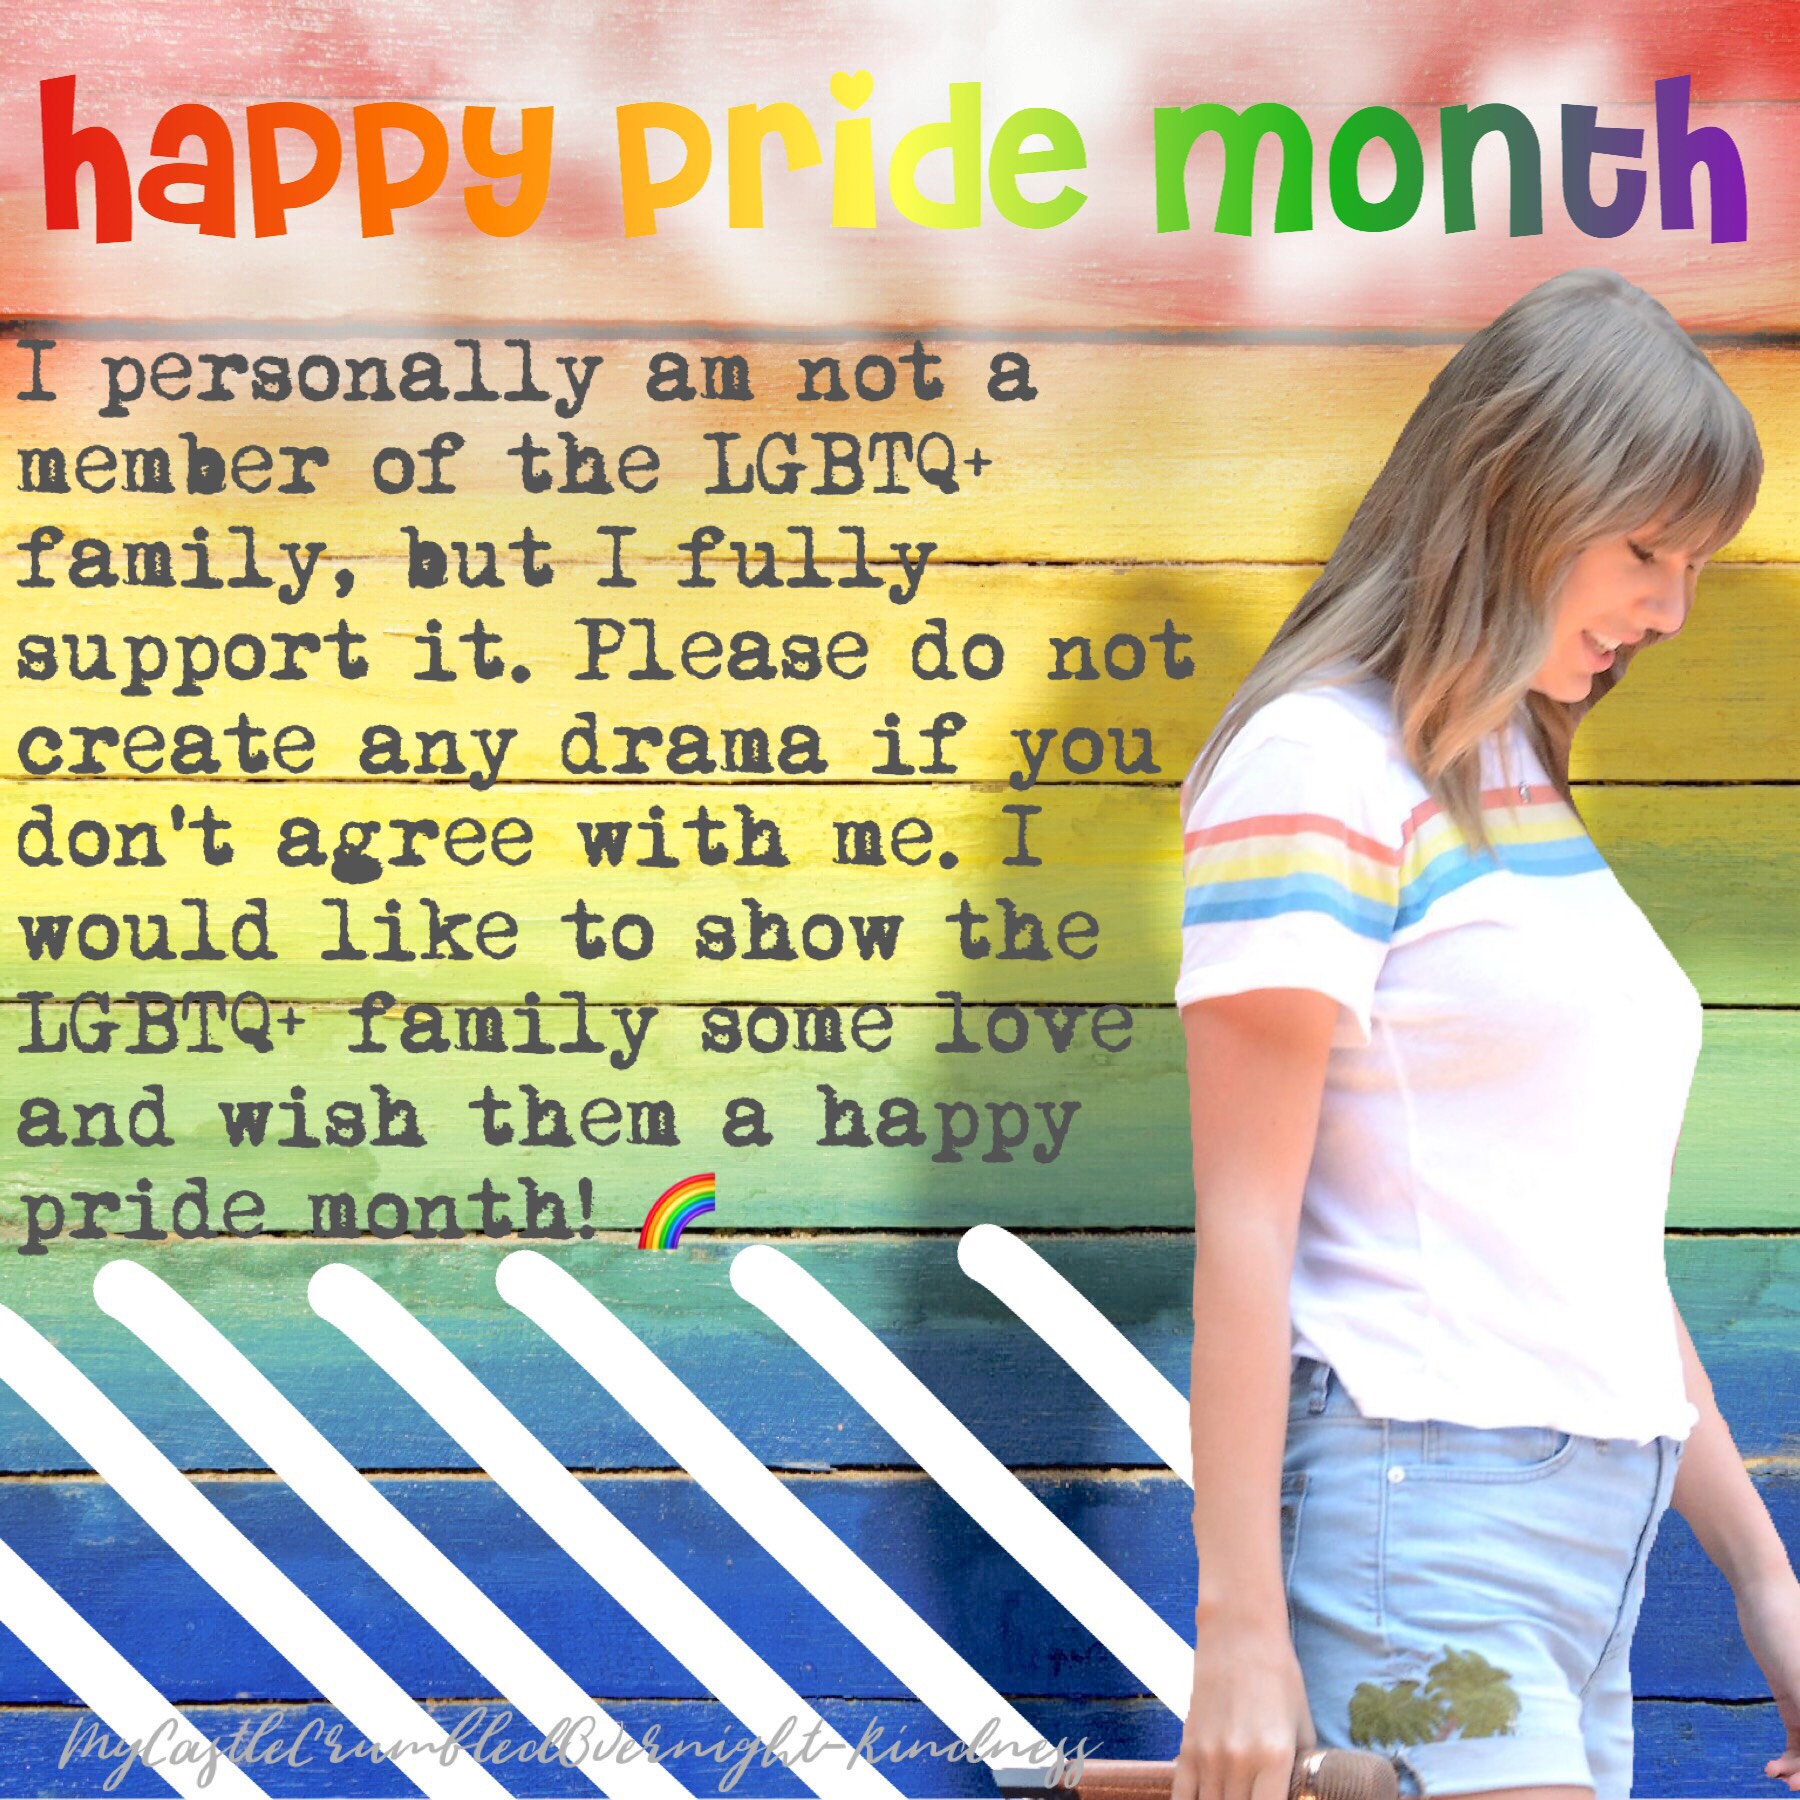 happy pride month! 🌈 tap 💕
make sure to go check out Taylor Swift’s Equality Act on her instagram. 
#SpreadTheLove 🌈🌈🌈🌈🌈🌈🌈🌈🌈🌈🌈🌈🌈